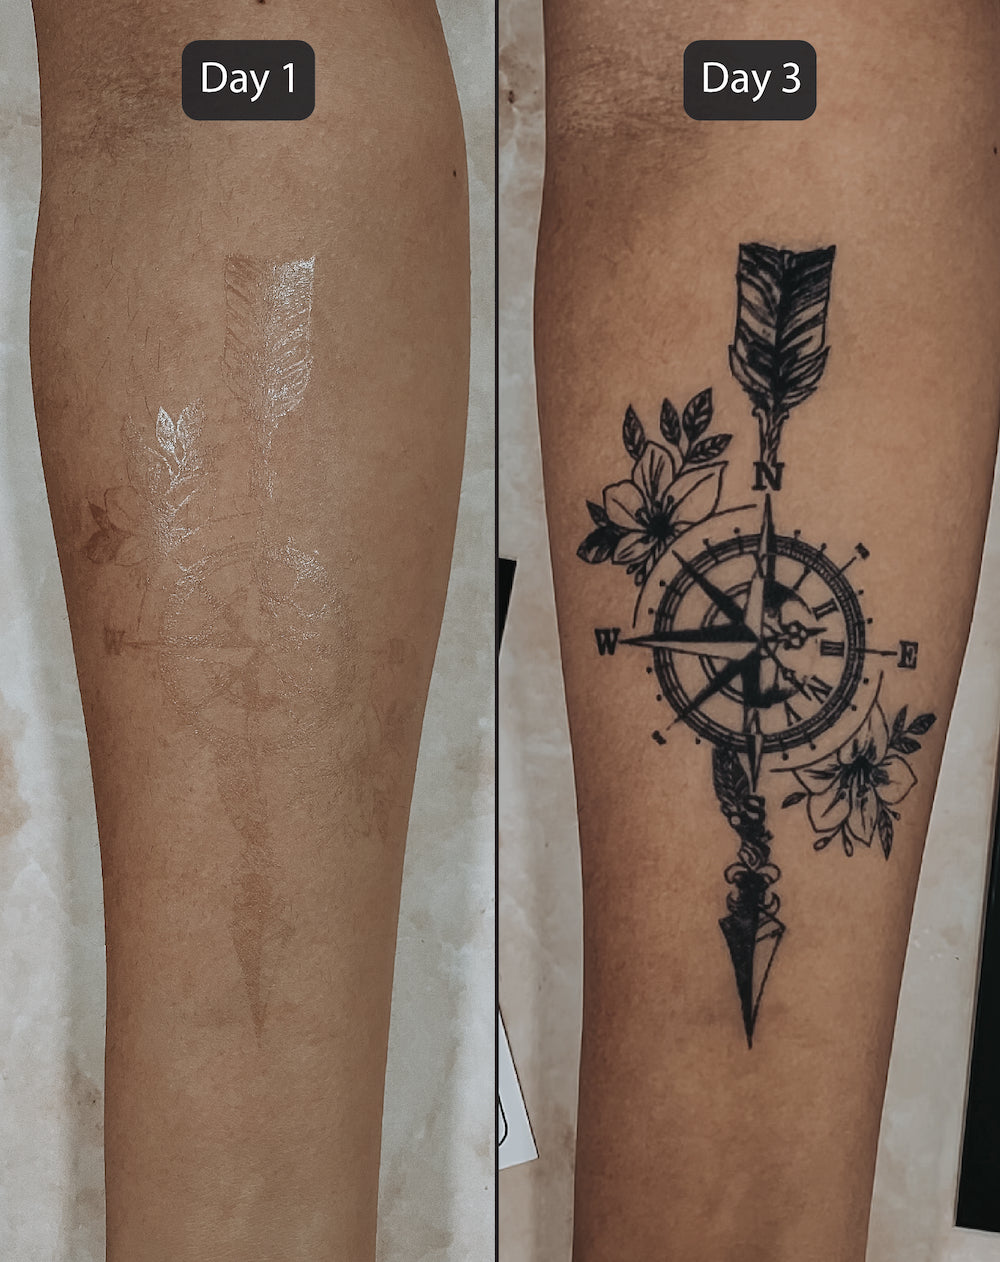 6 Painless  NonPermanent Tattoo Alternatives In Singapore For A Trial  Before The Needles